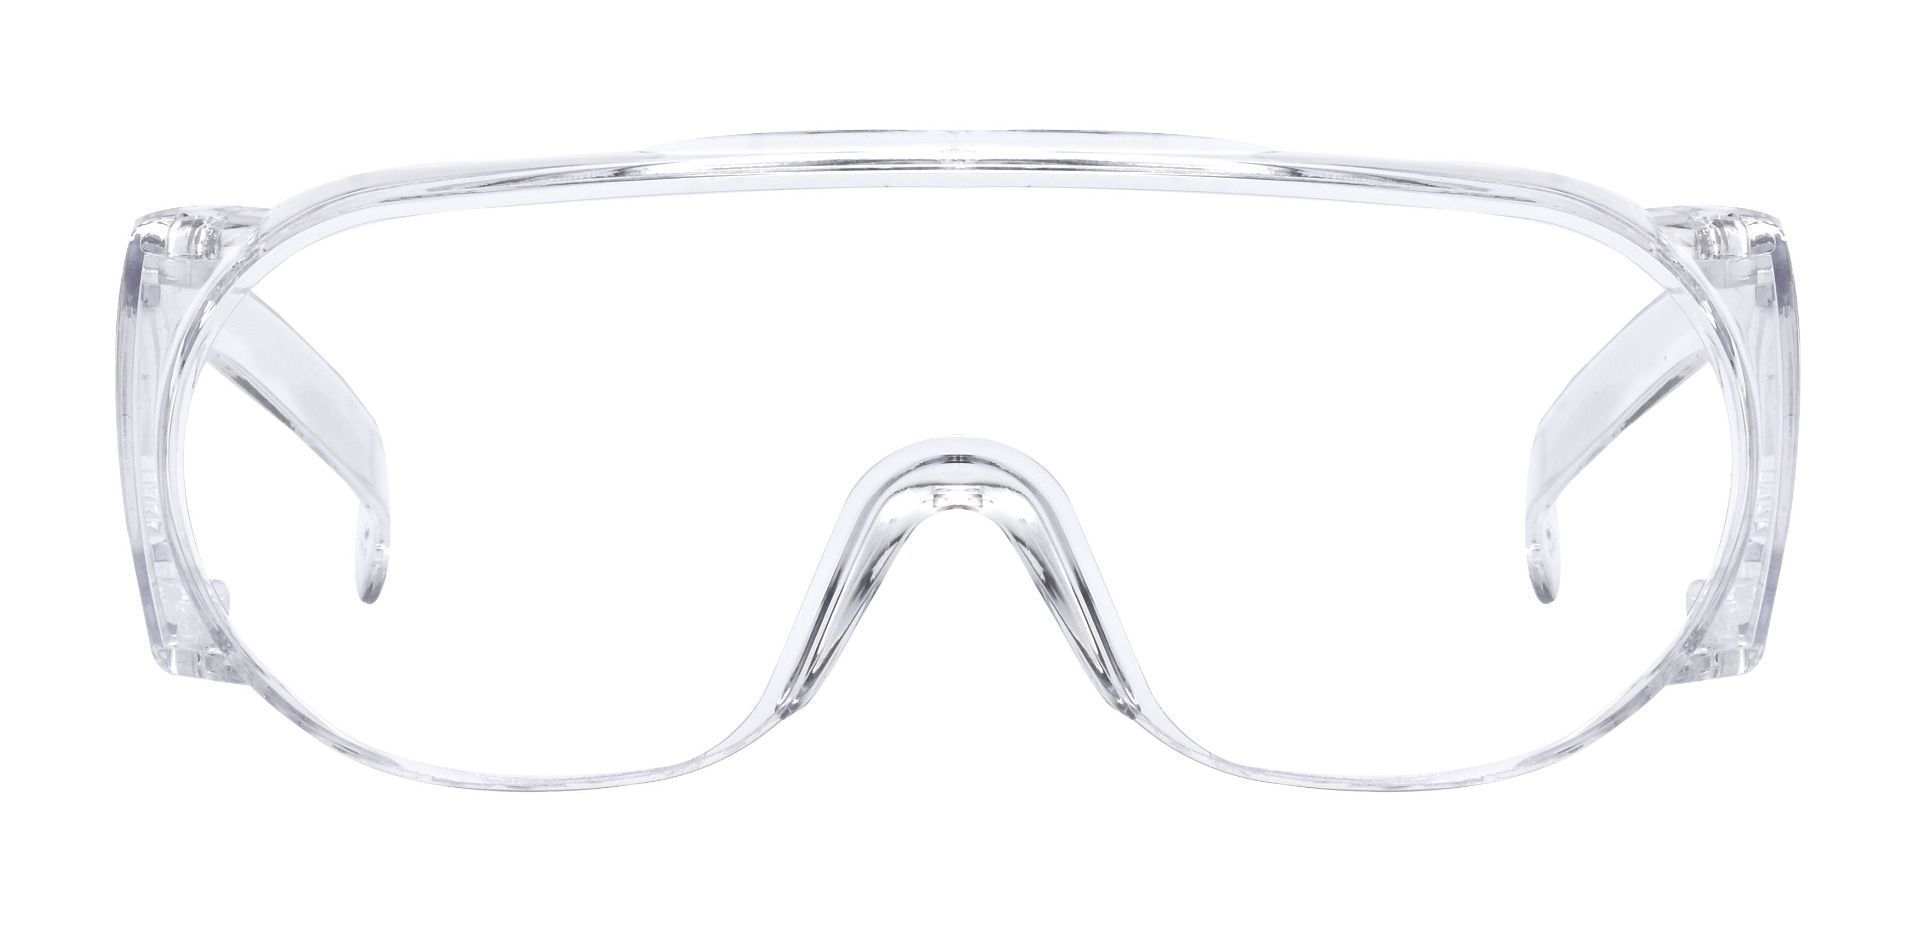 The Lima Protective Glasses